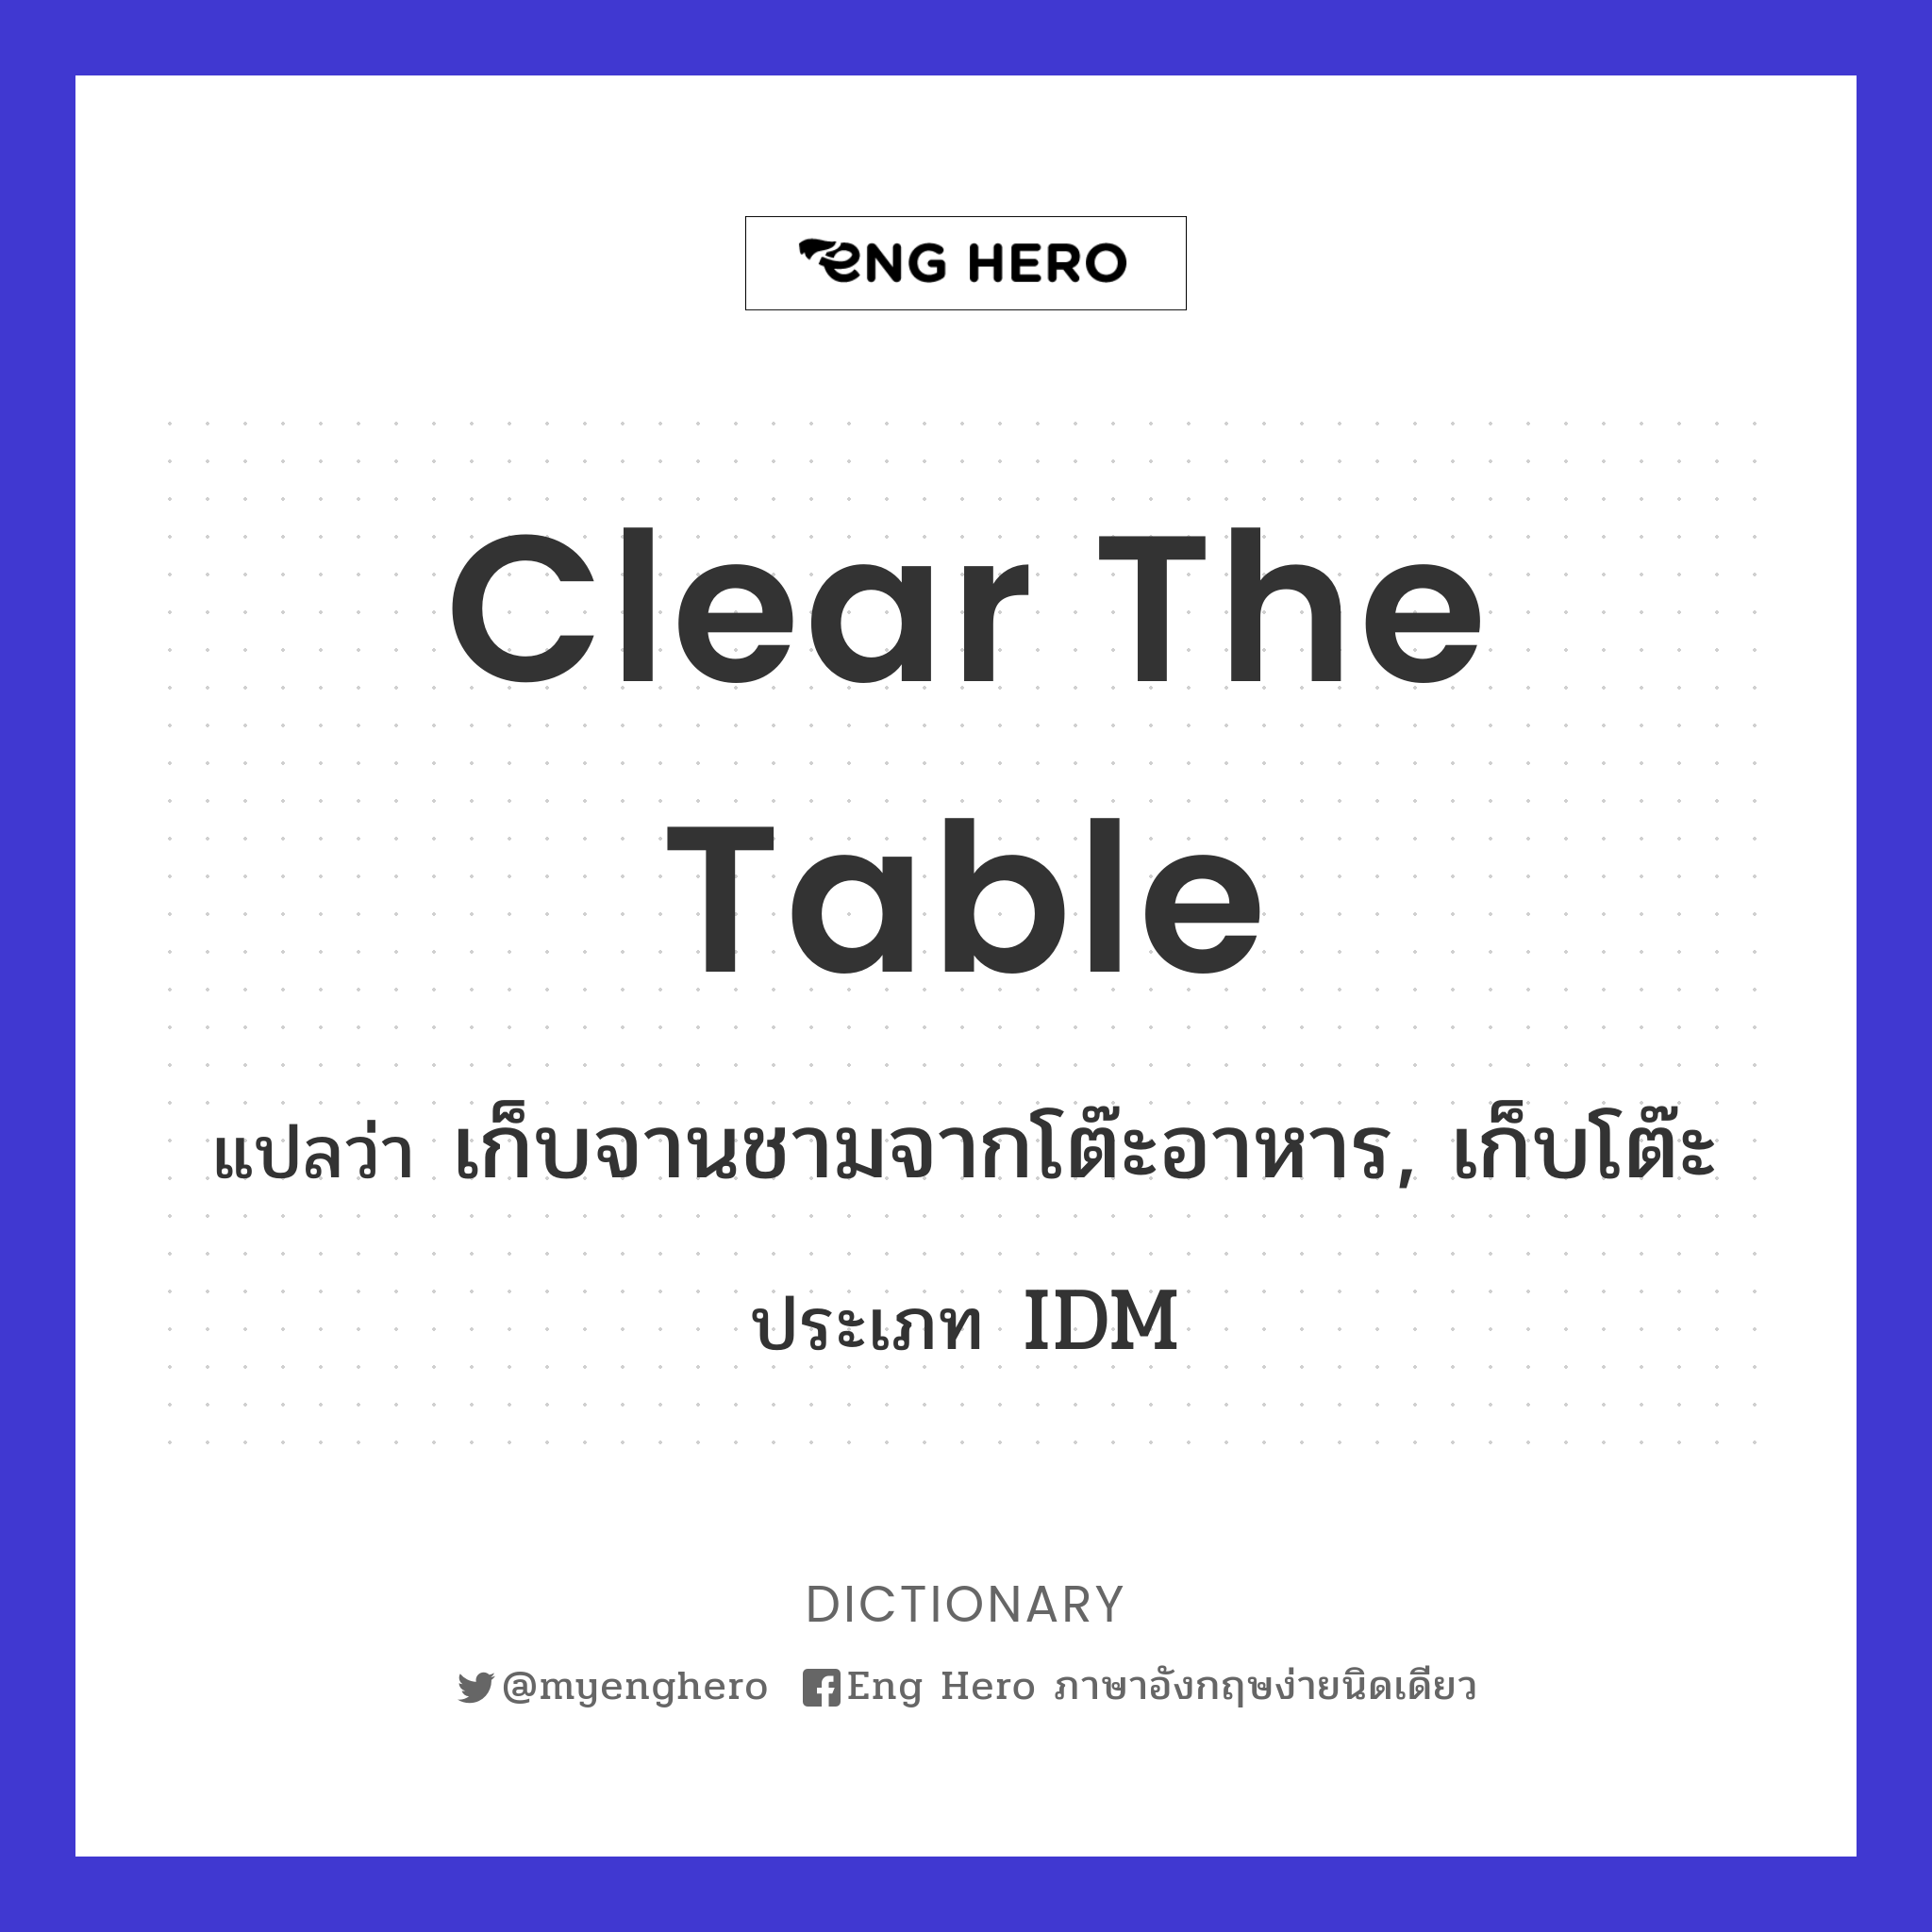 clear the table